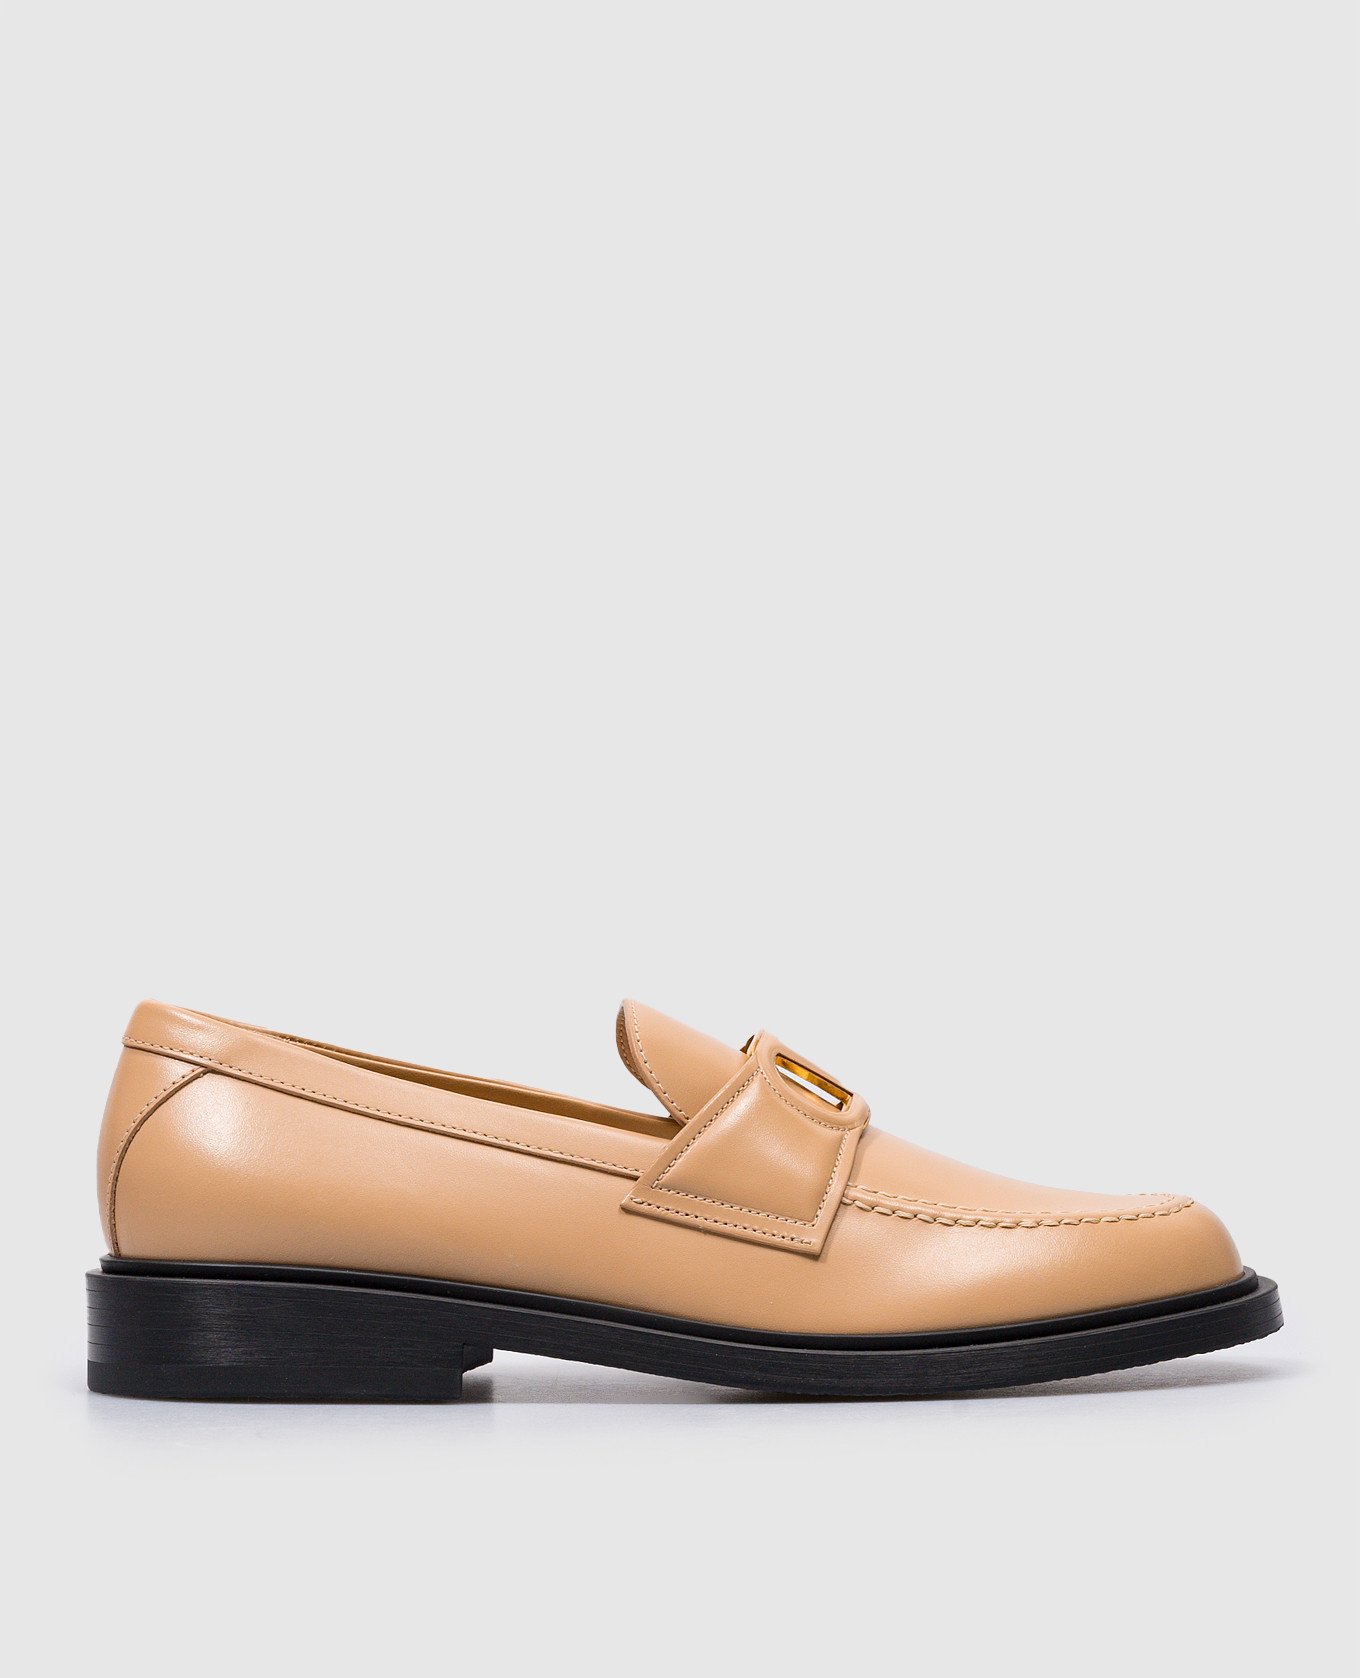 VLogo Signature logo loafers in brown leather